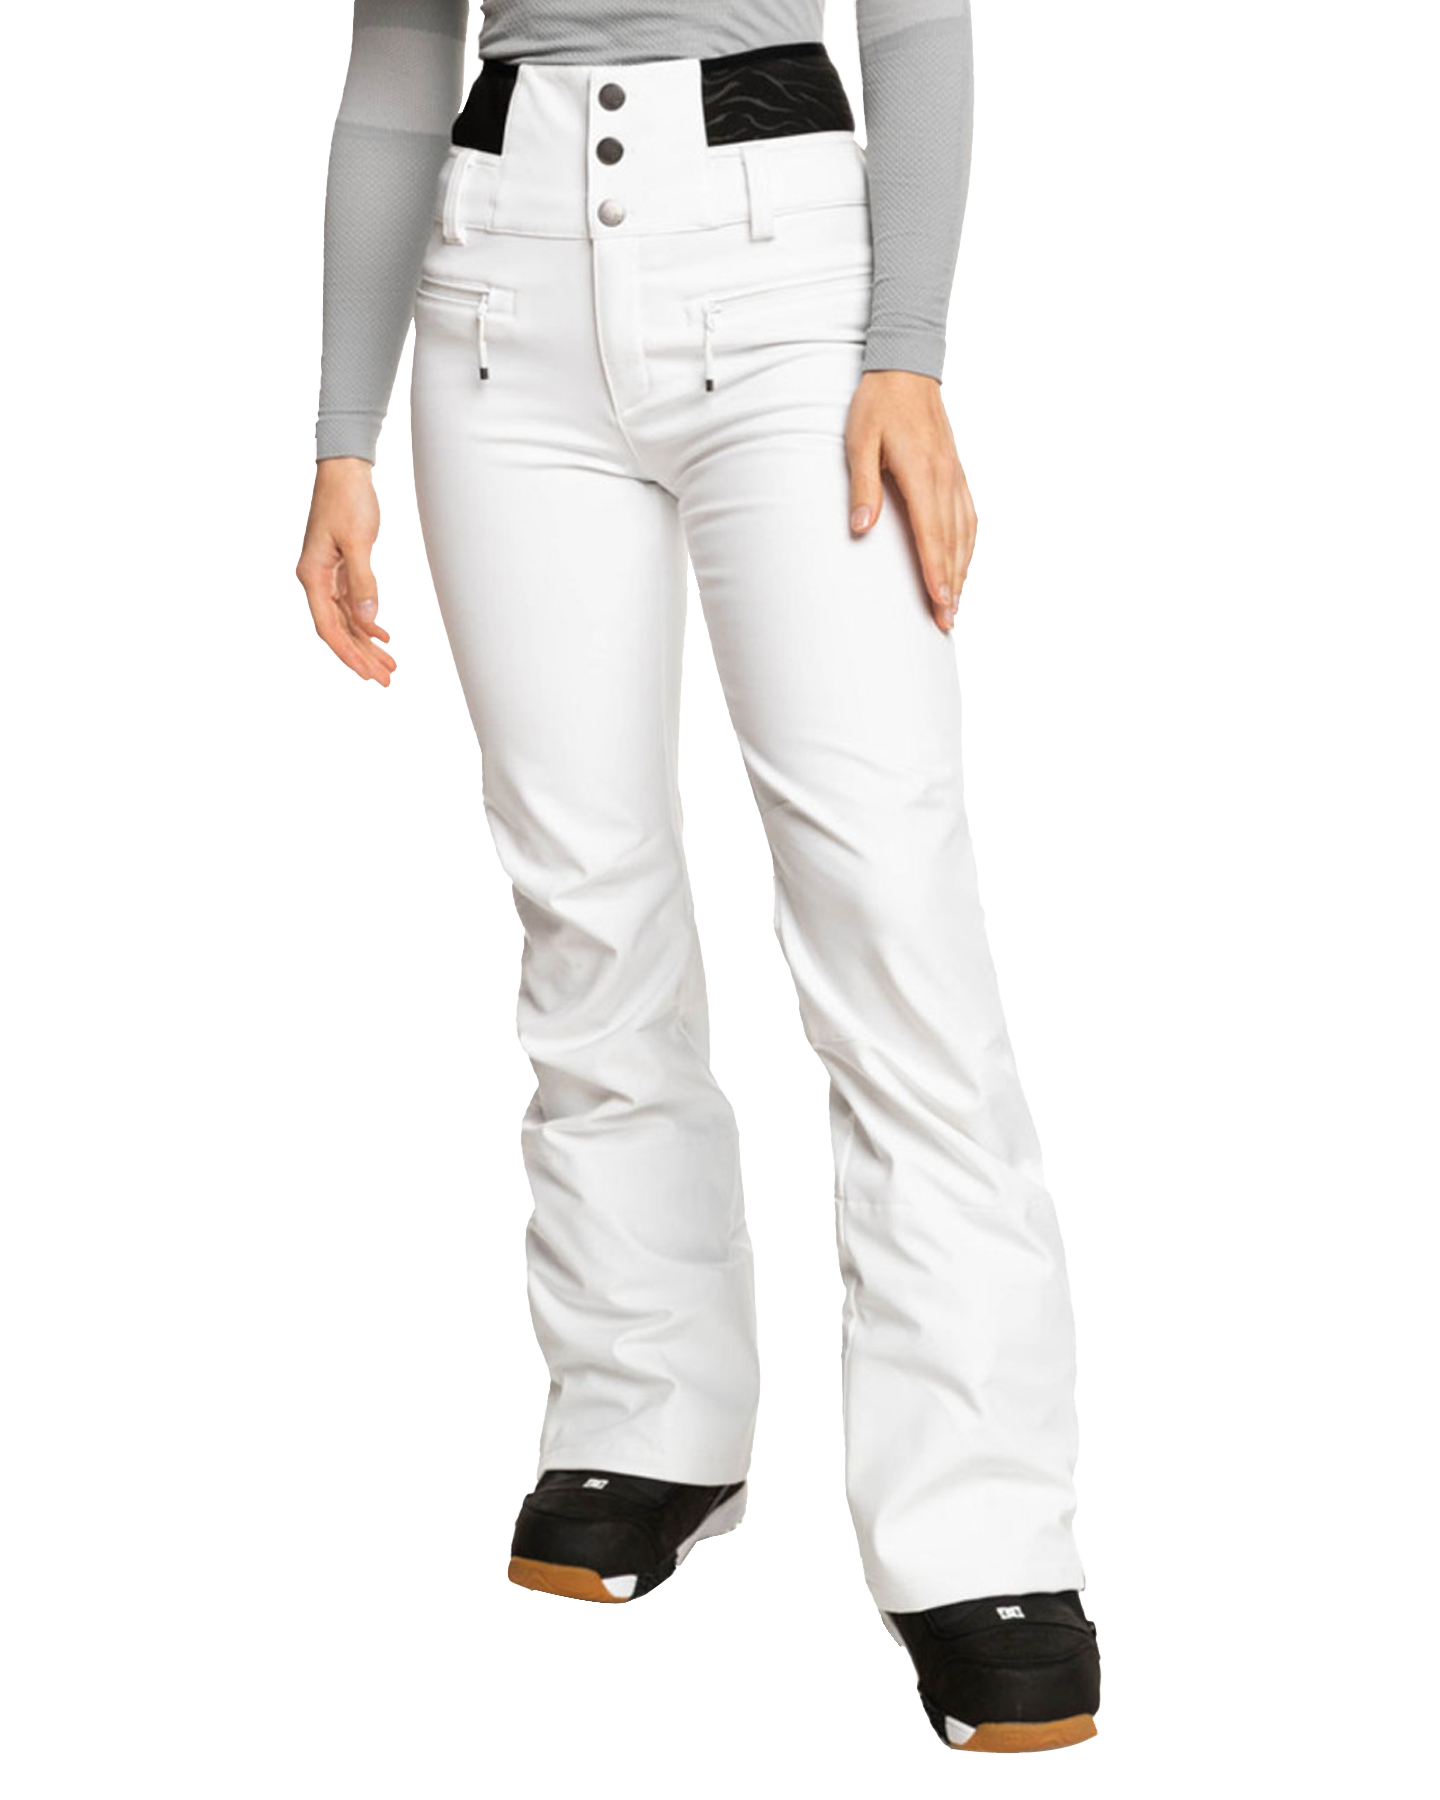 Rising High - Insulated Snow Pants for Women